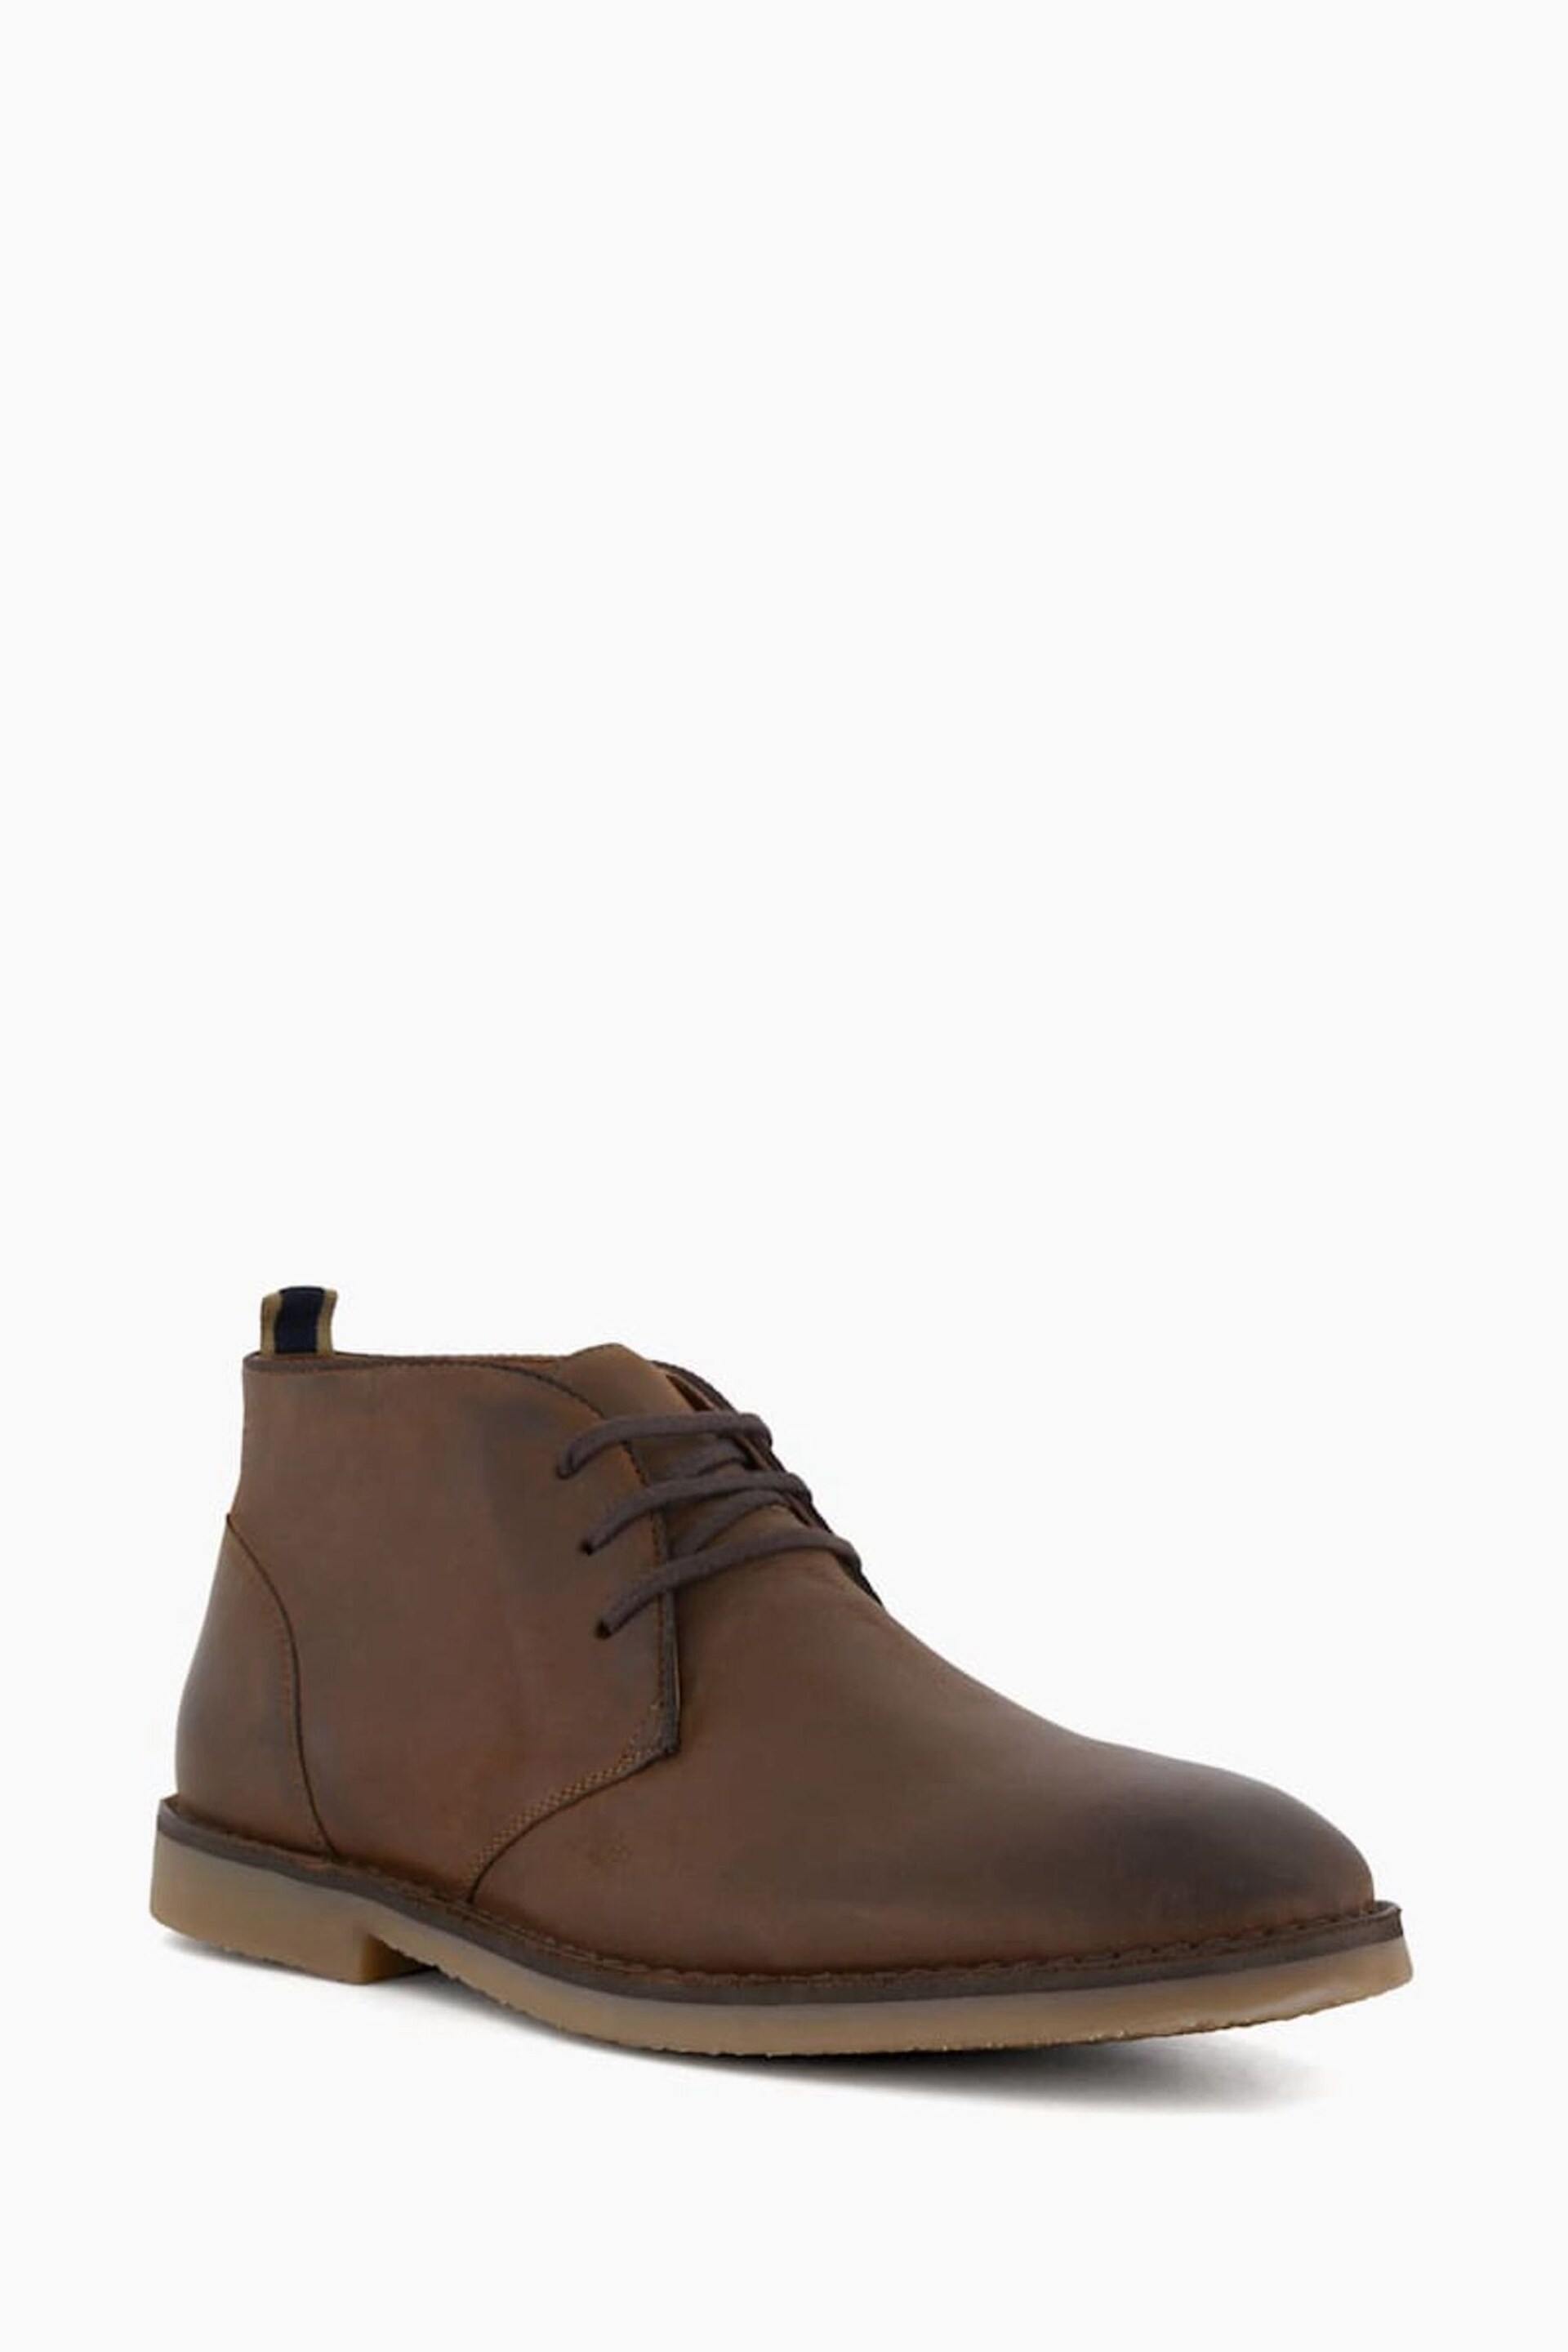 Dune London Brown Cashed Chukka Boots - Image 4 of 6